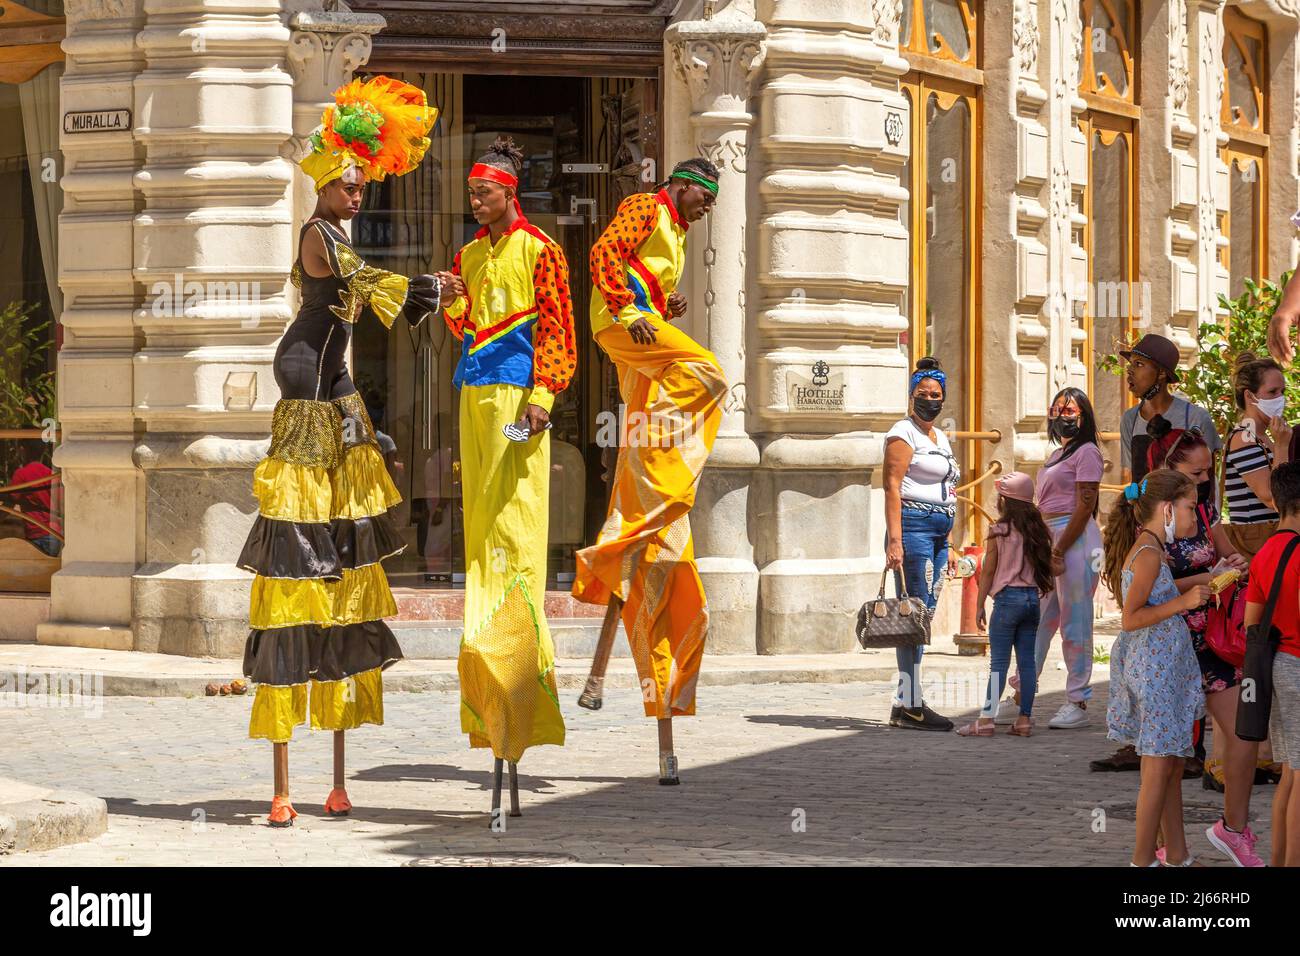 Conga dancers in stilts performing in Old Havana. They are wearing colorful traditional clothing. Stock Photo